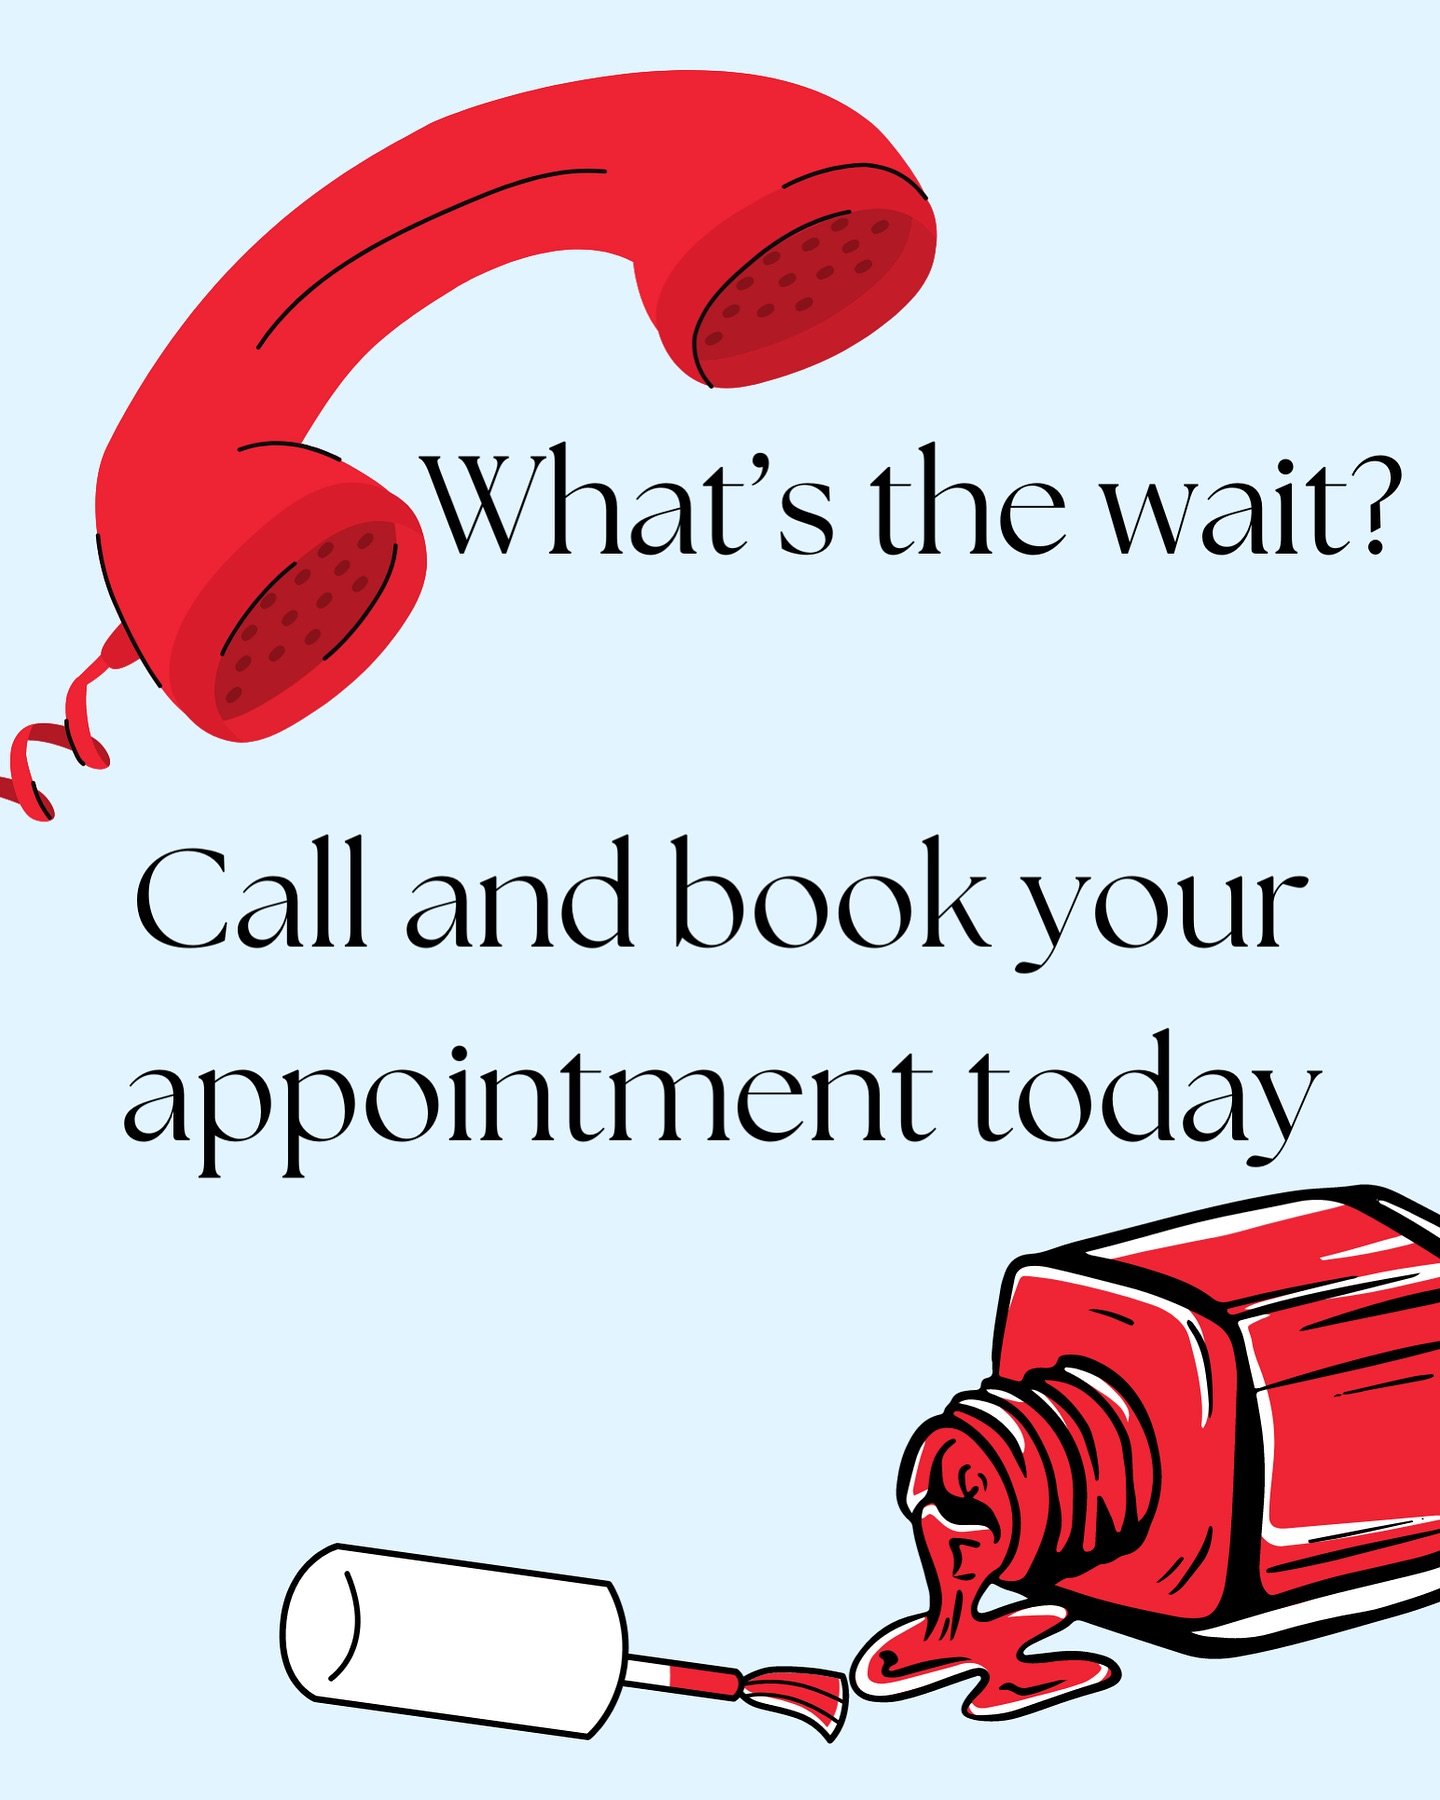 We have so many new faces so we want to remind everyone about the importance of booking an appointment!!

You can call our front desk at (662)638-0770. They will work their hardest to find a spot for you, but we do advise to book in advance as the sp